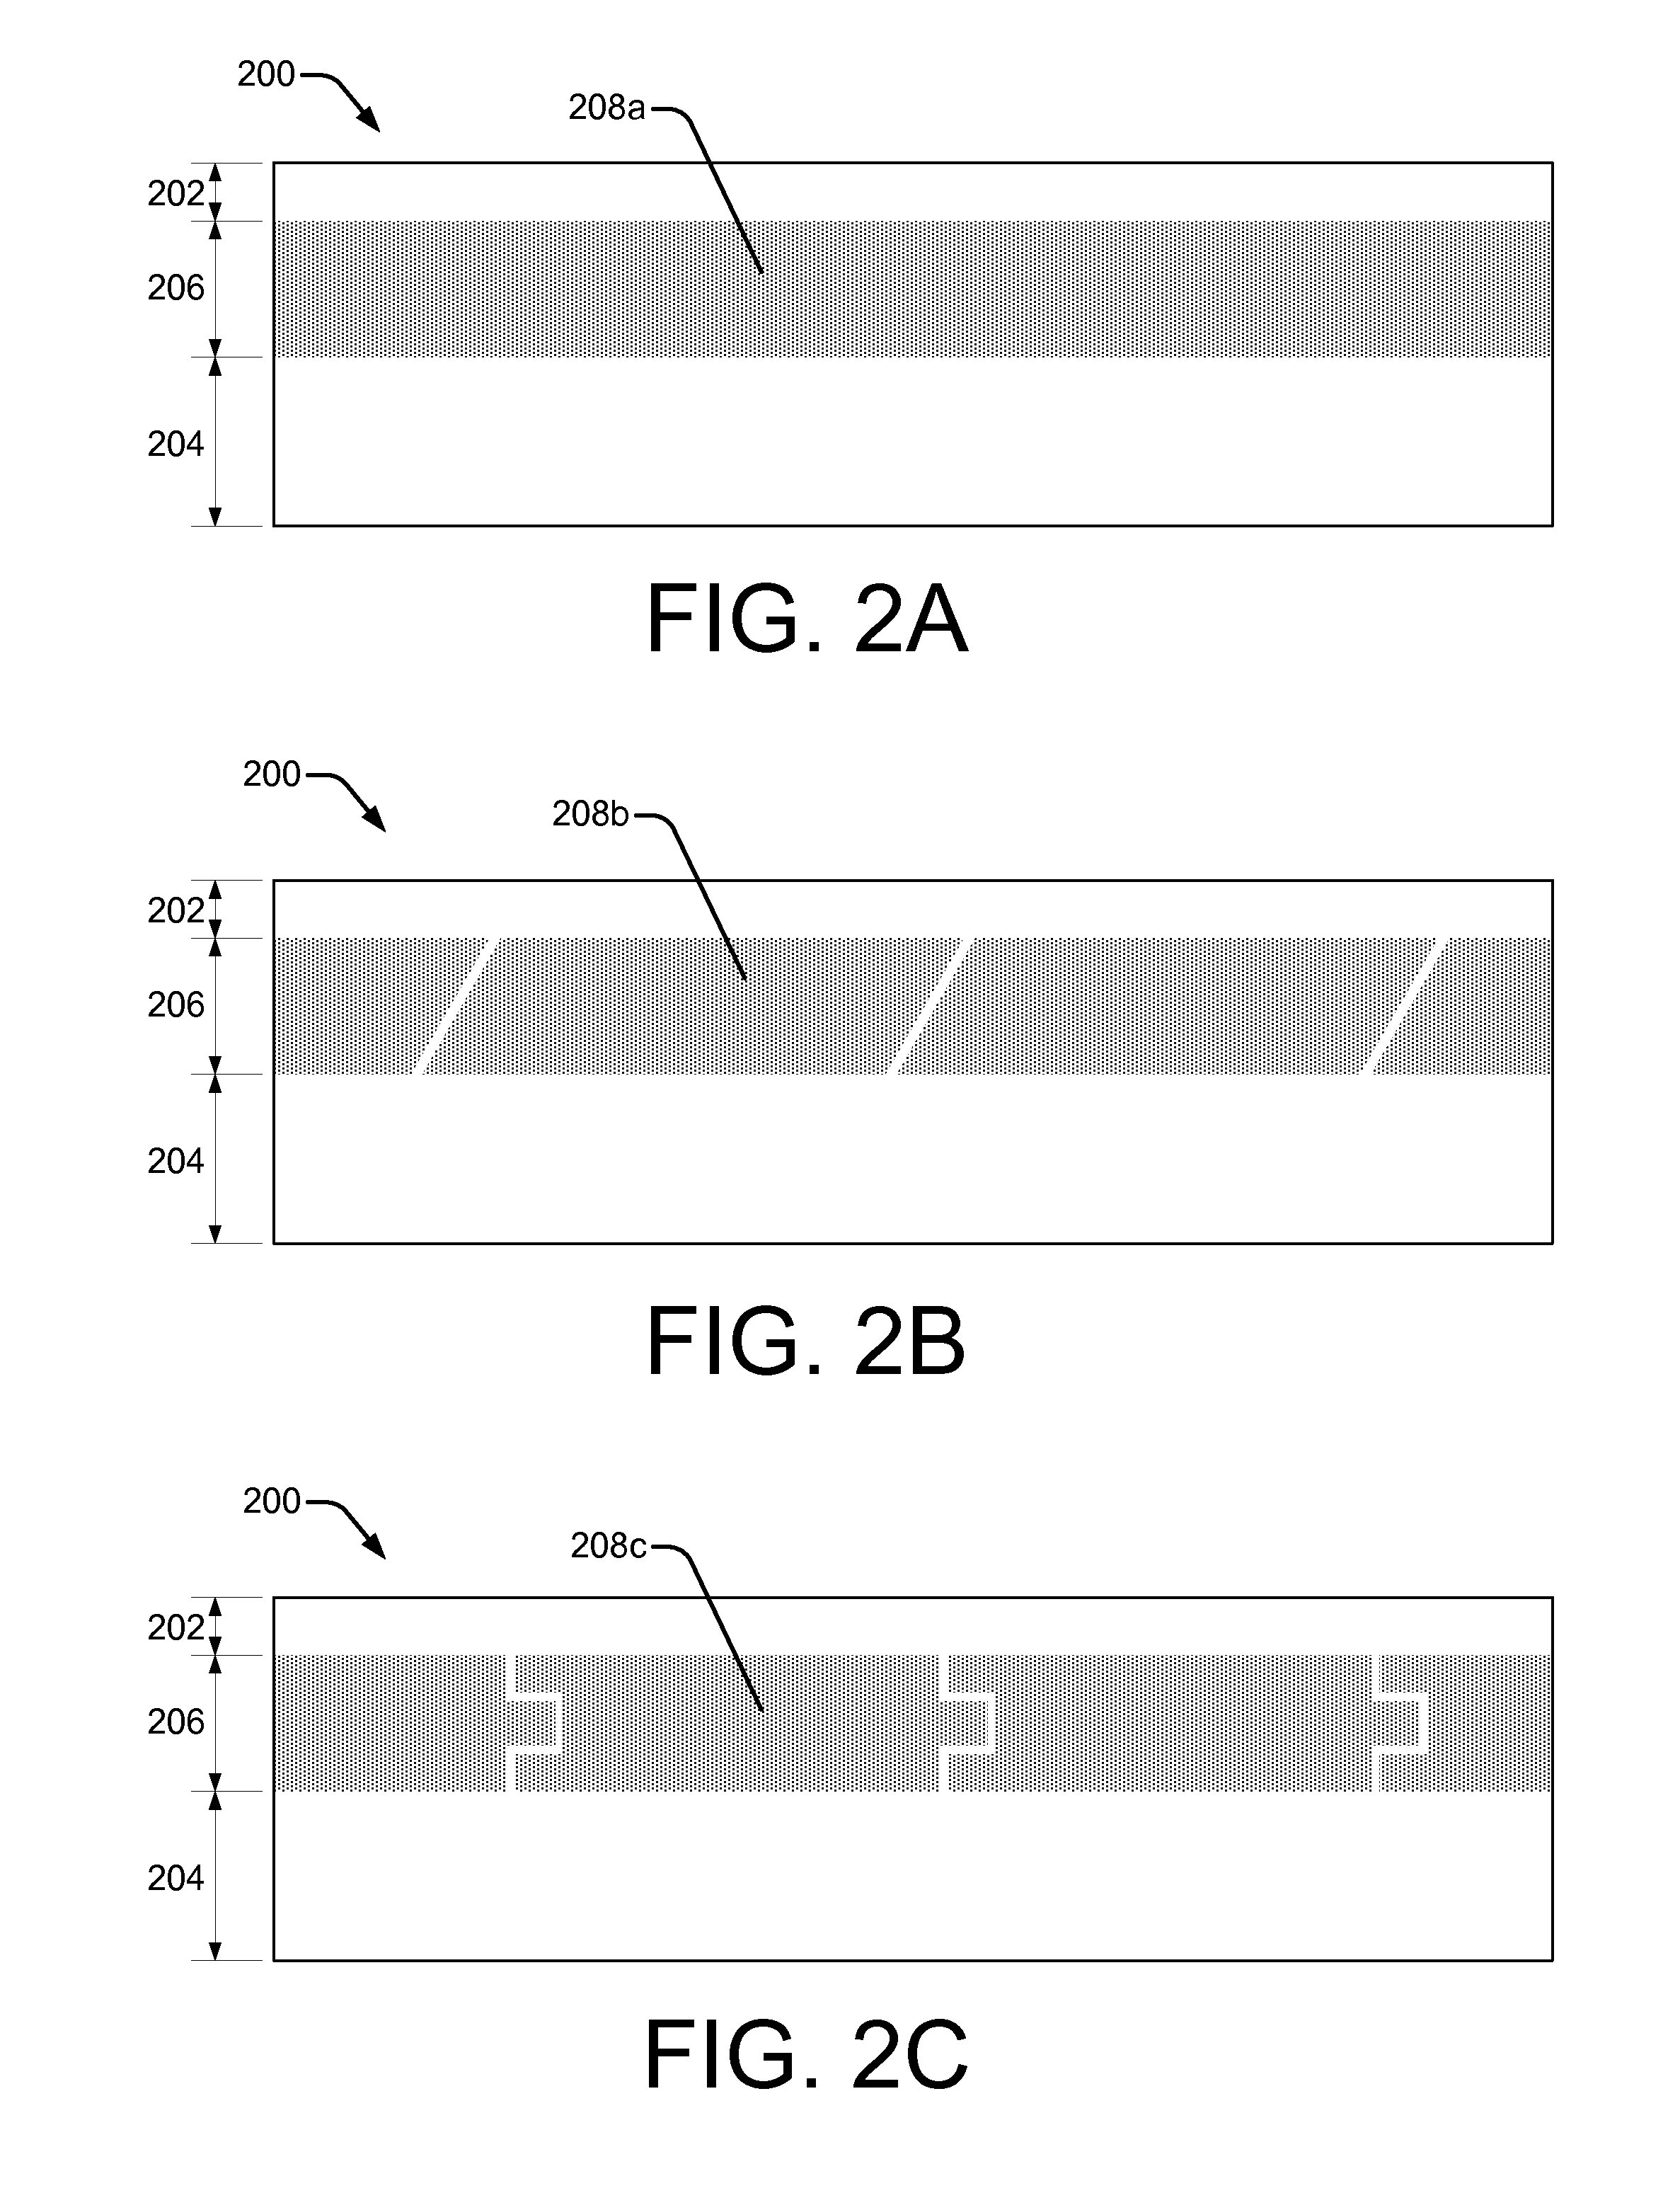 Composite components formed with loose ceramic material